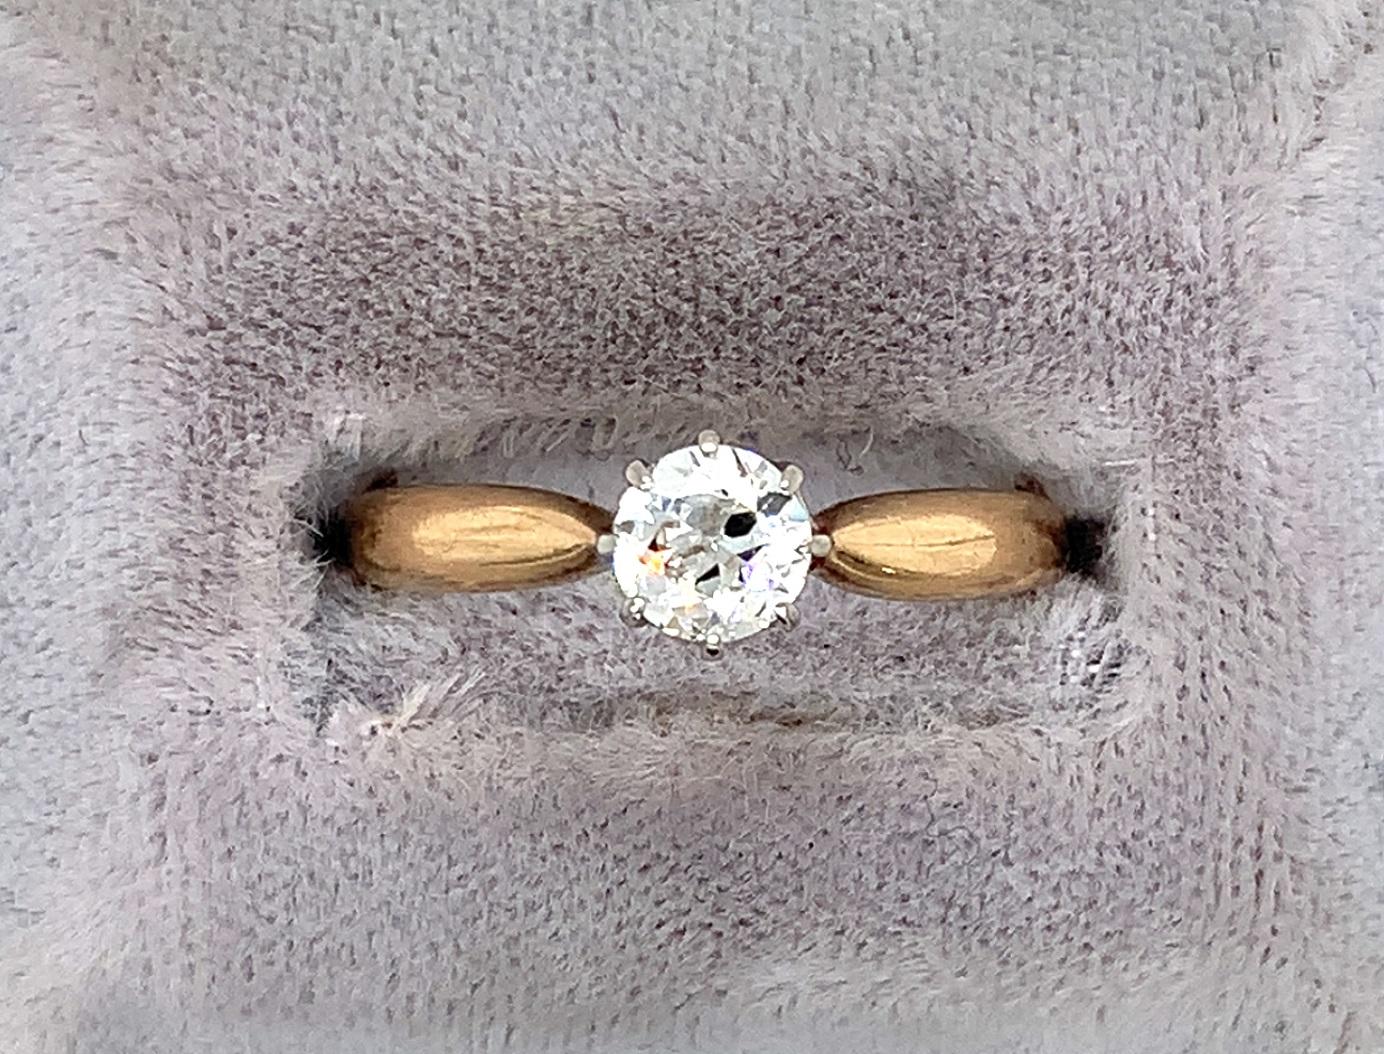 14K yellow gold diamond ring featuring an European cut diamond weighing about 1/2 carat.  The diamond measures 5.2mm and is set in an 18K white gold 8 prong head that looks like a crown.  The diamond I-1 clarity and and H-I color.  The ring fits a